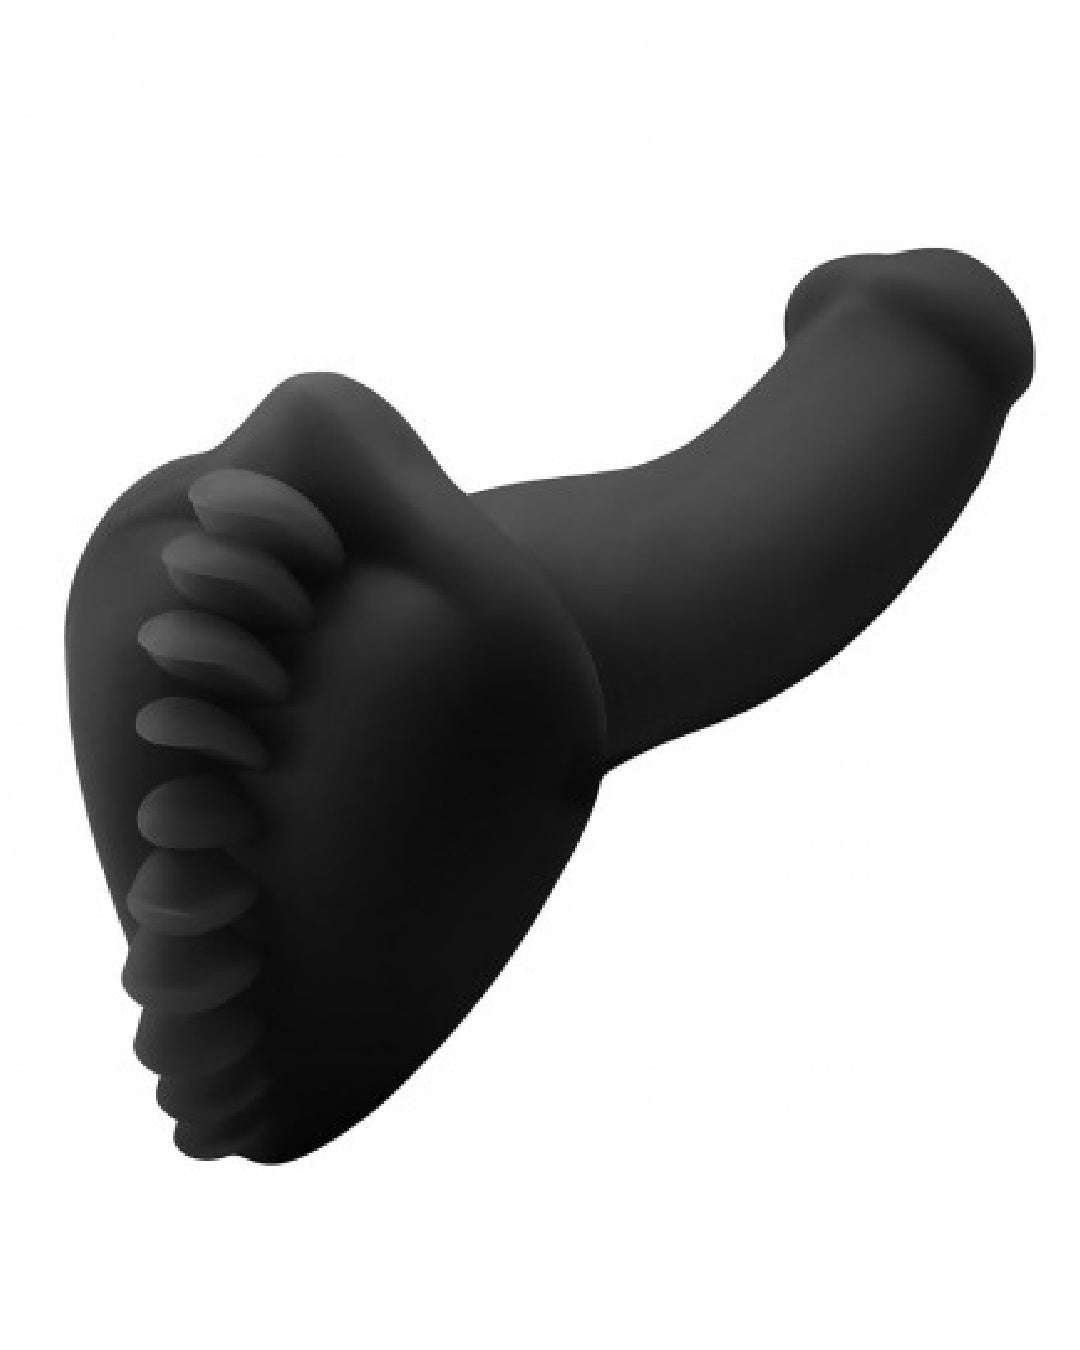 Shagger Extreme Textured Dildo Base for Harness Play by Bumpher  - Black